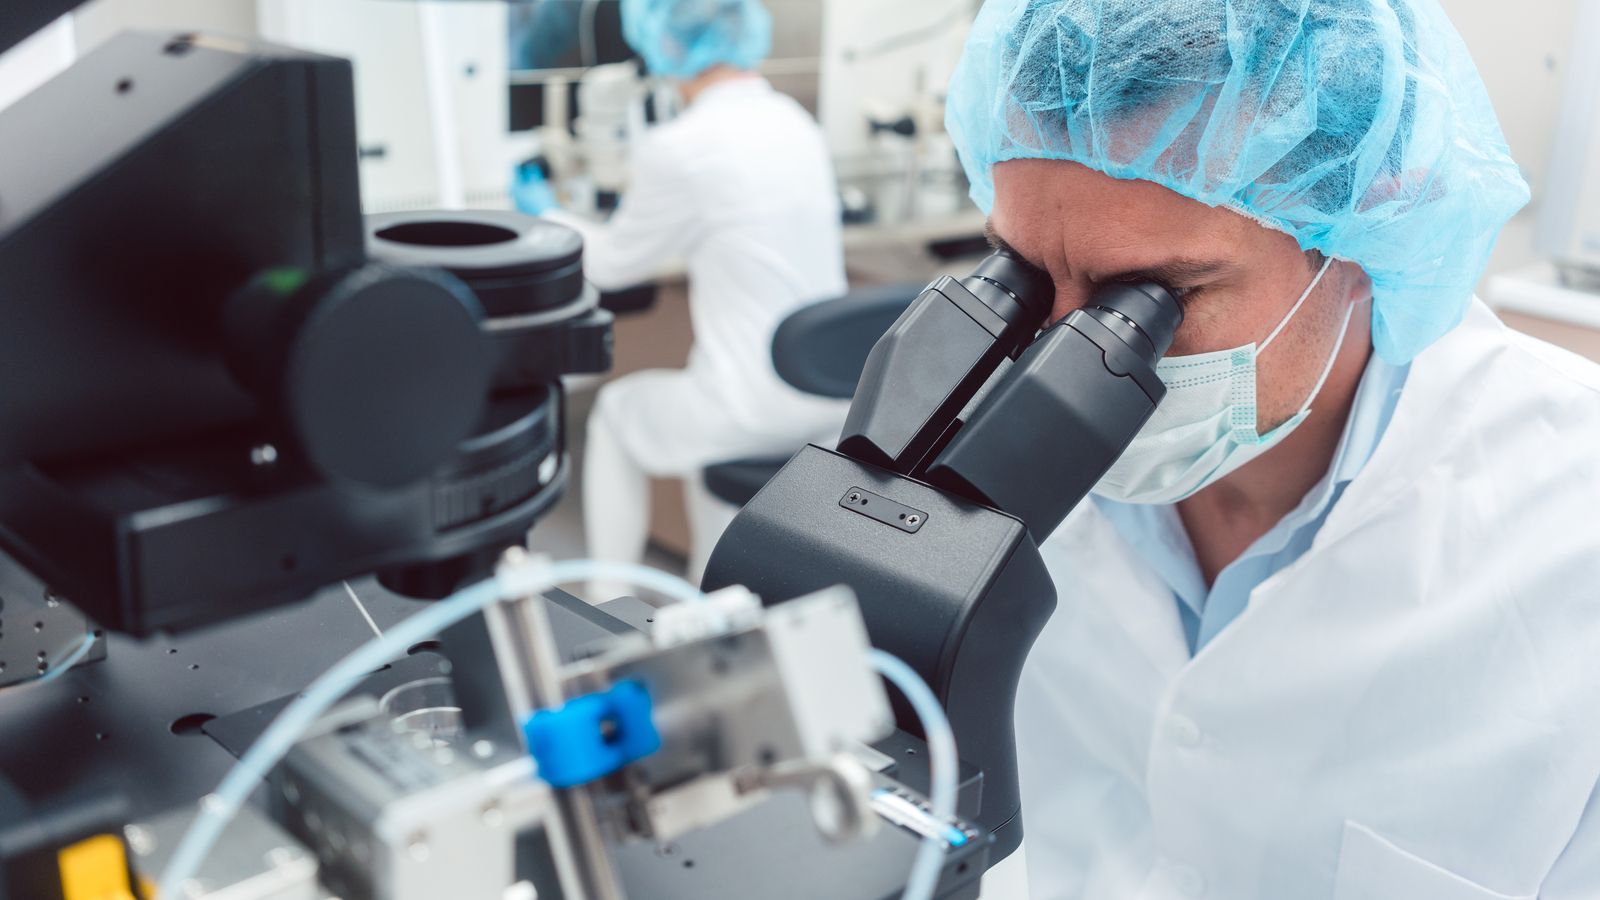 A scientist in medical gear peers through a microscope representing IBIO stock.